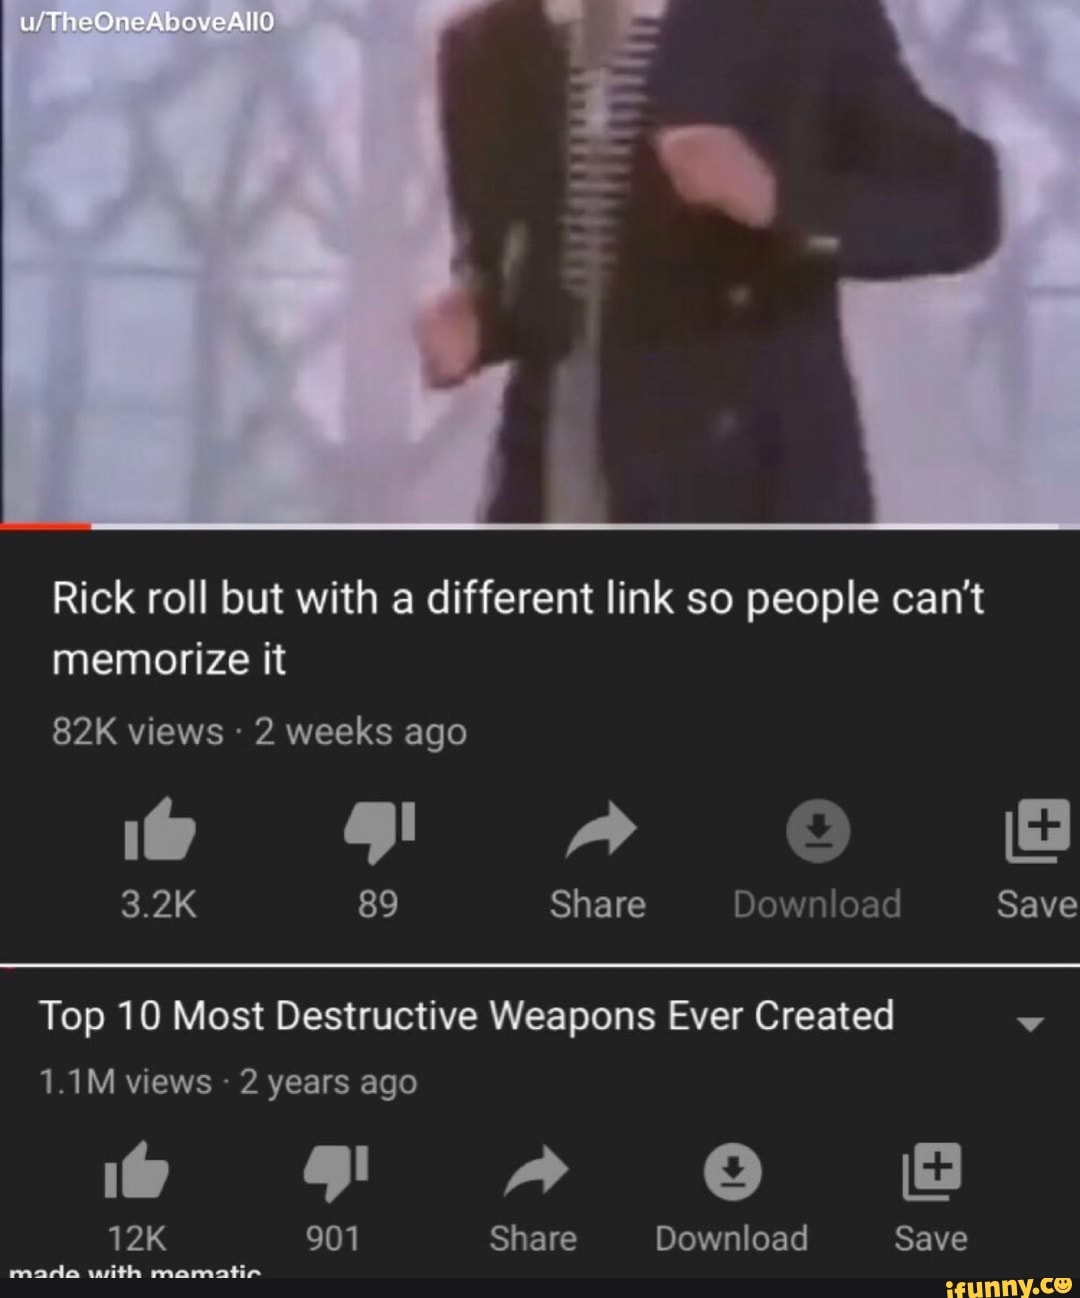 Rick roll, but with different link 